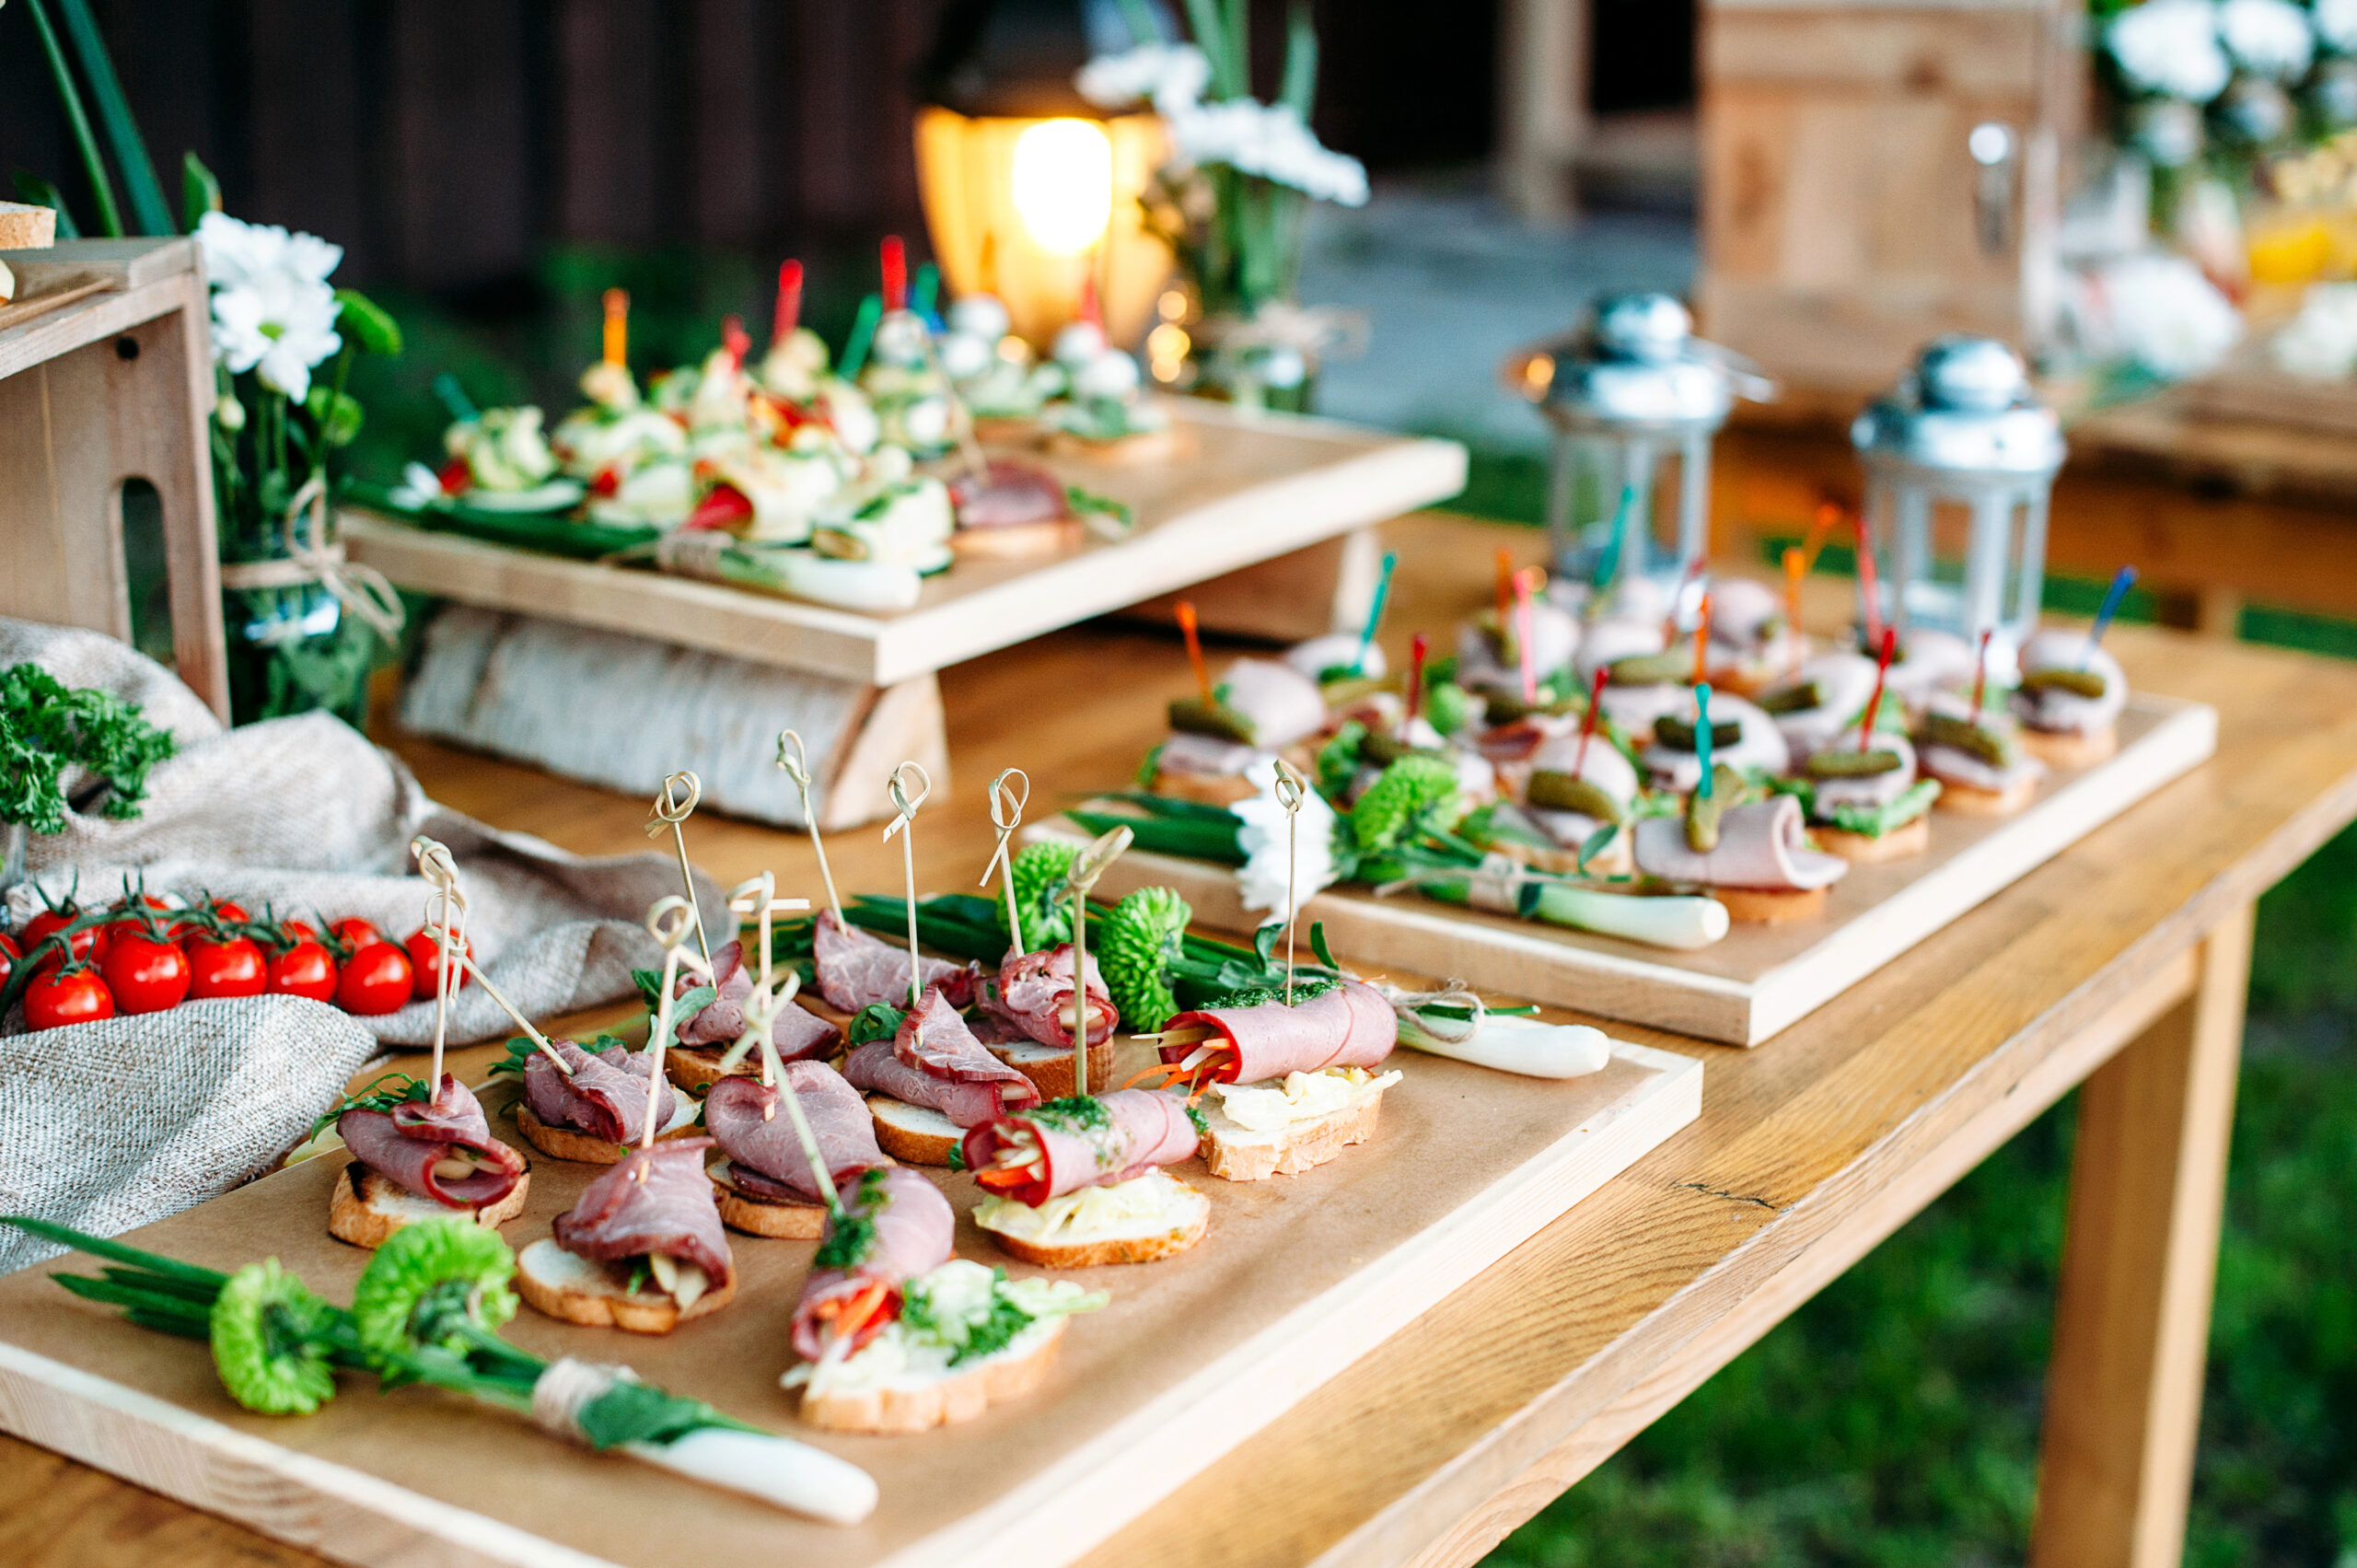 Beautiful catering banquet table decorated in rustic style. Different snacks and sandwiches